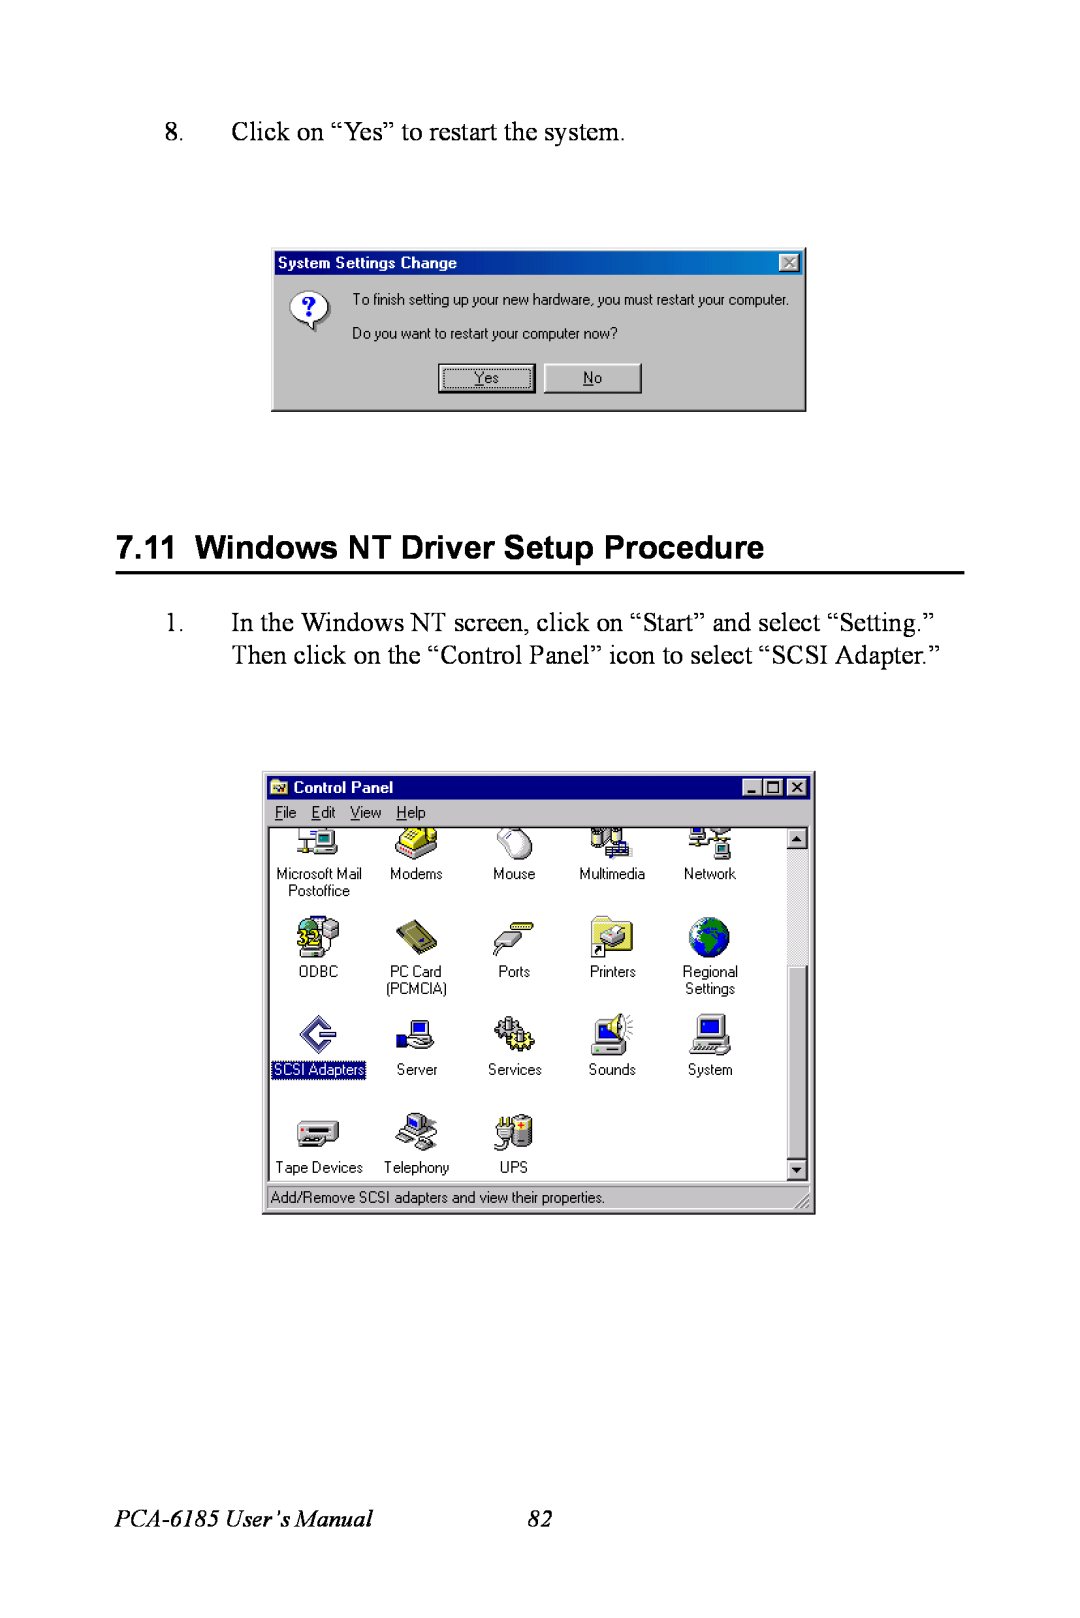 Advantech user manual Windows NT Driver Setup Procedure, Click on “Yes” to restart the system, PCA-6185 User’s Manual 